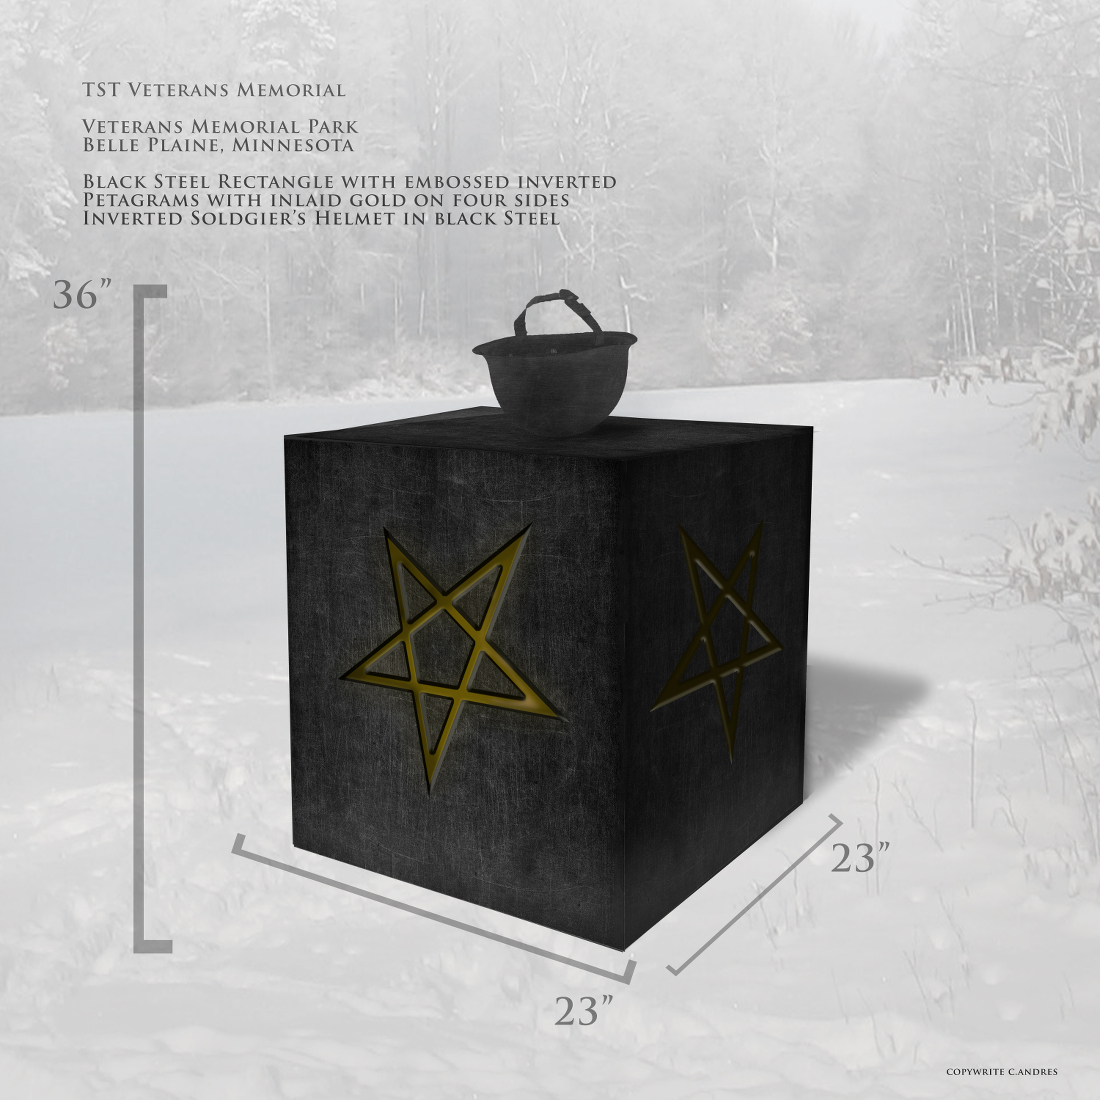 Public Records Reveal Lots of Backlash Against Satanic War Memorial in MN Town